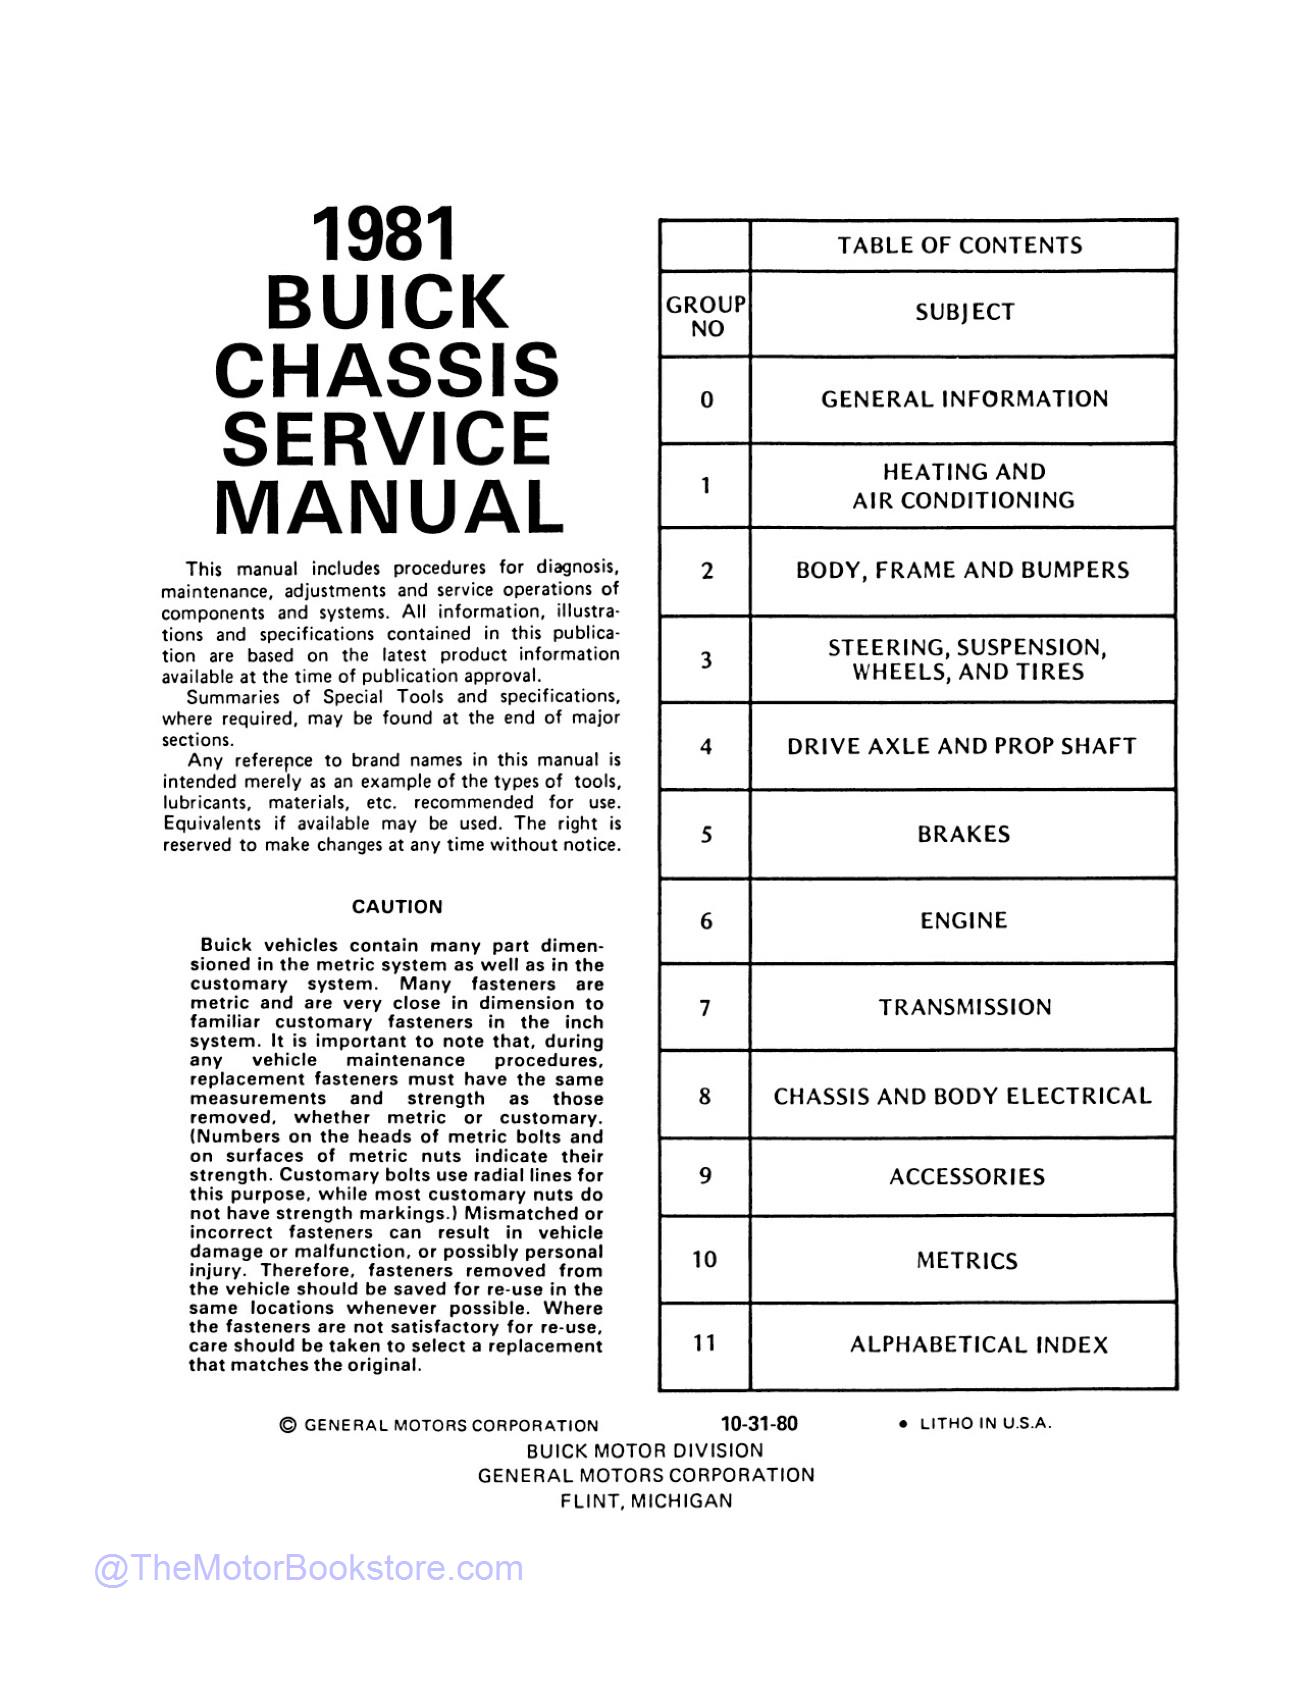 1981 Buick Chassis Service Manual  - Table of Contents